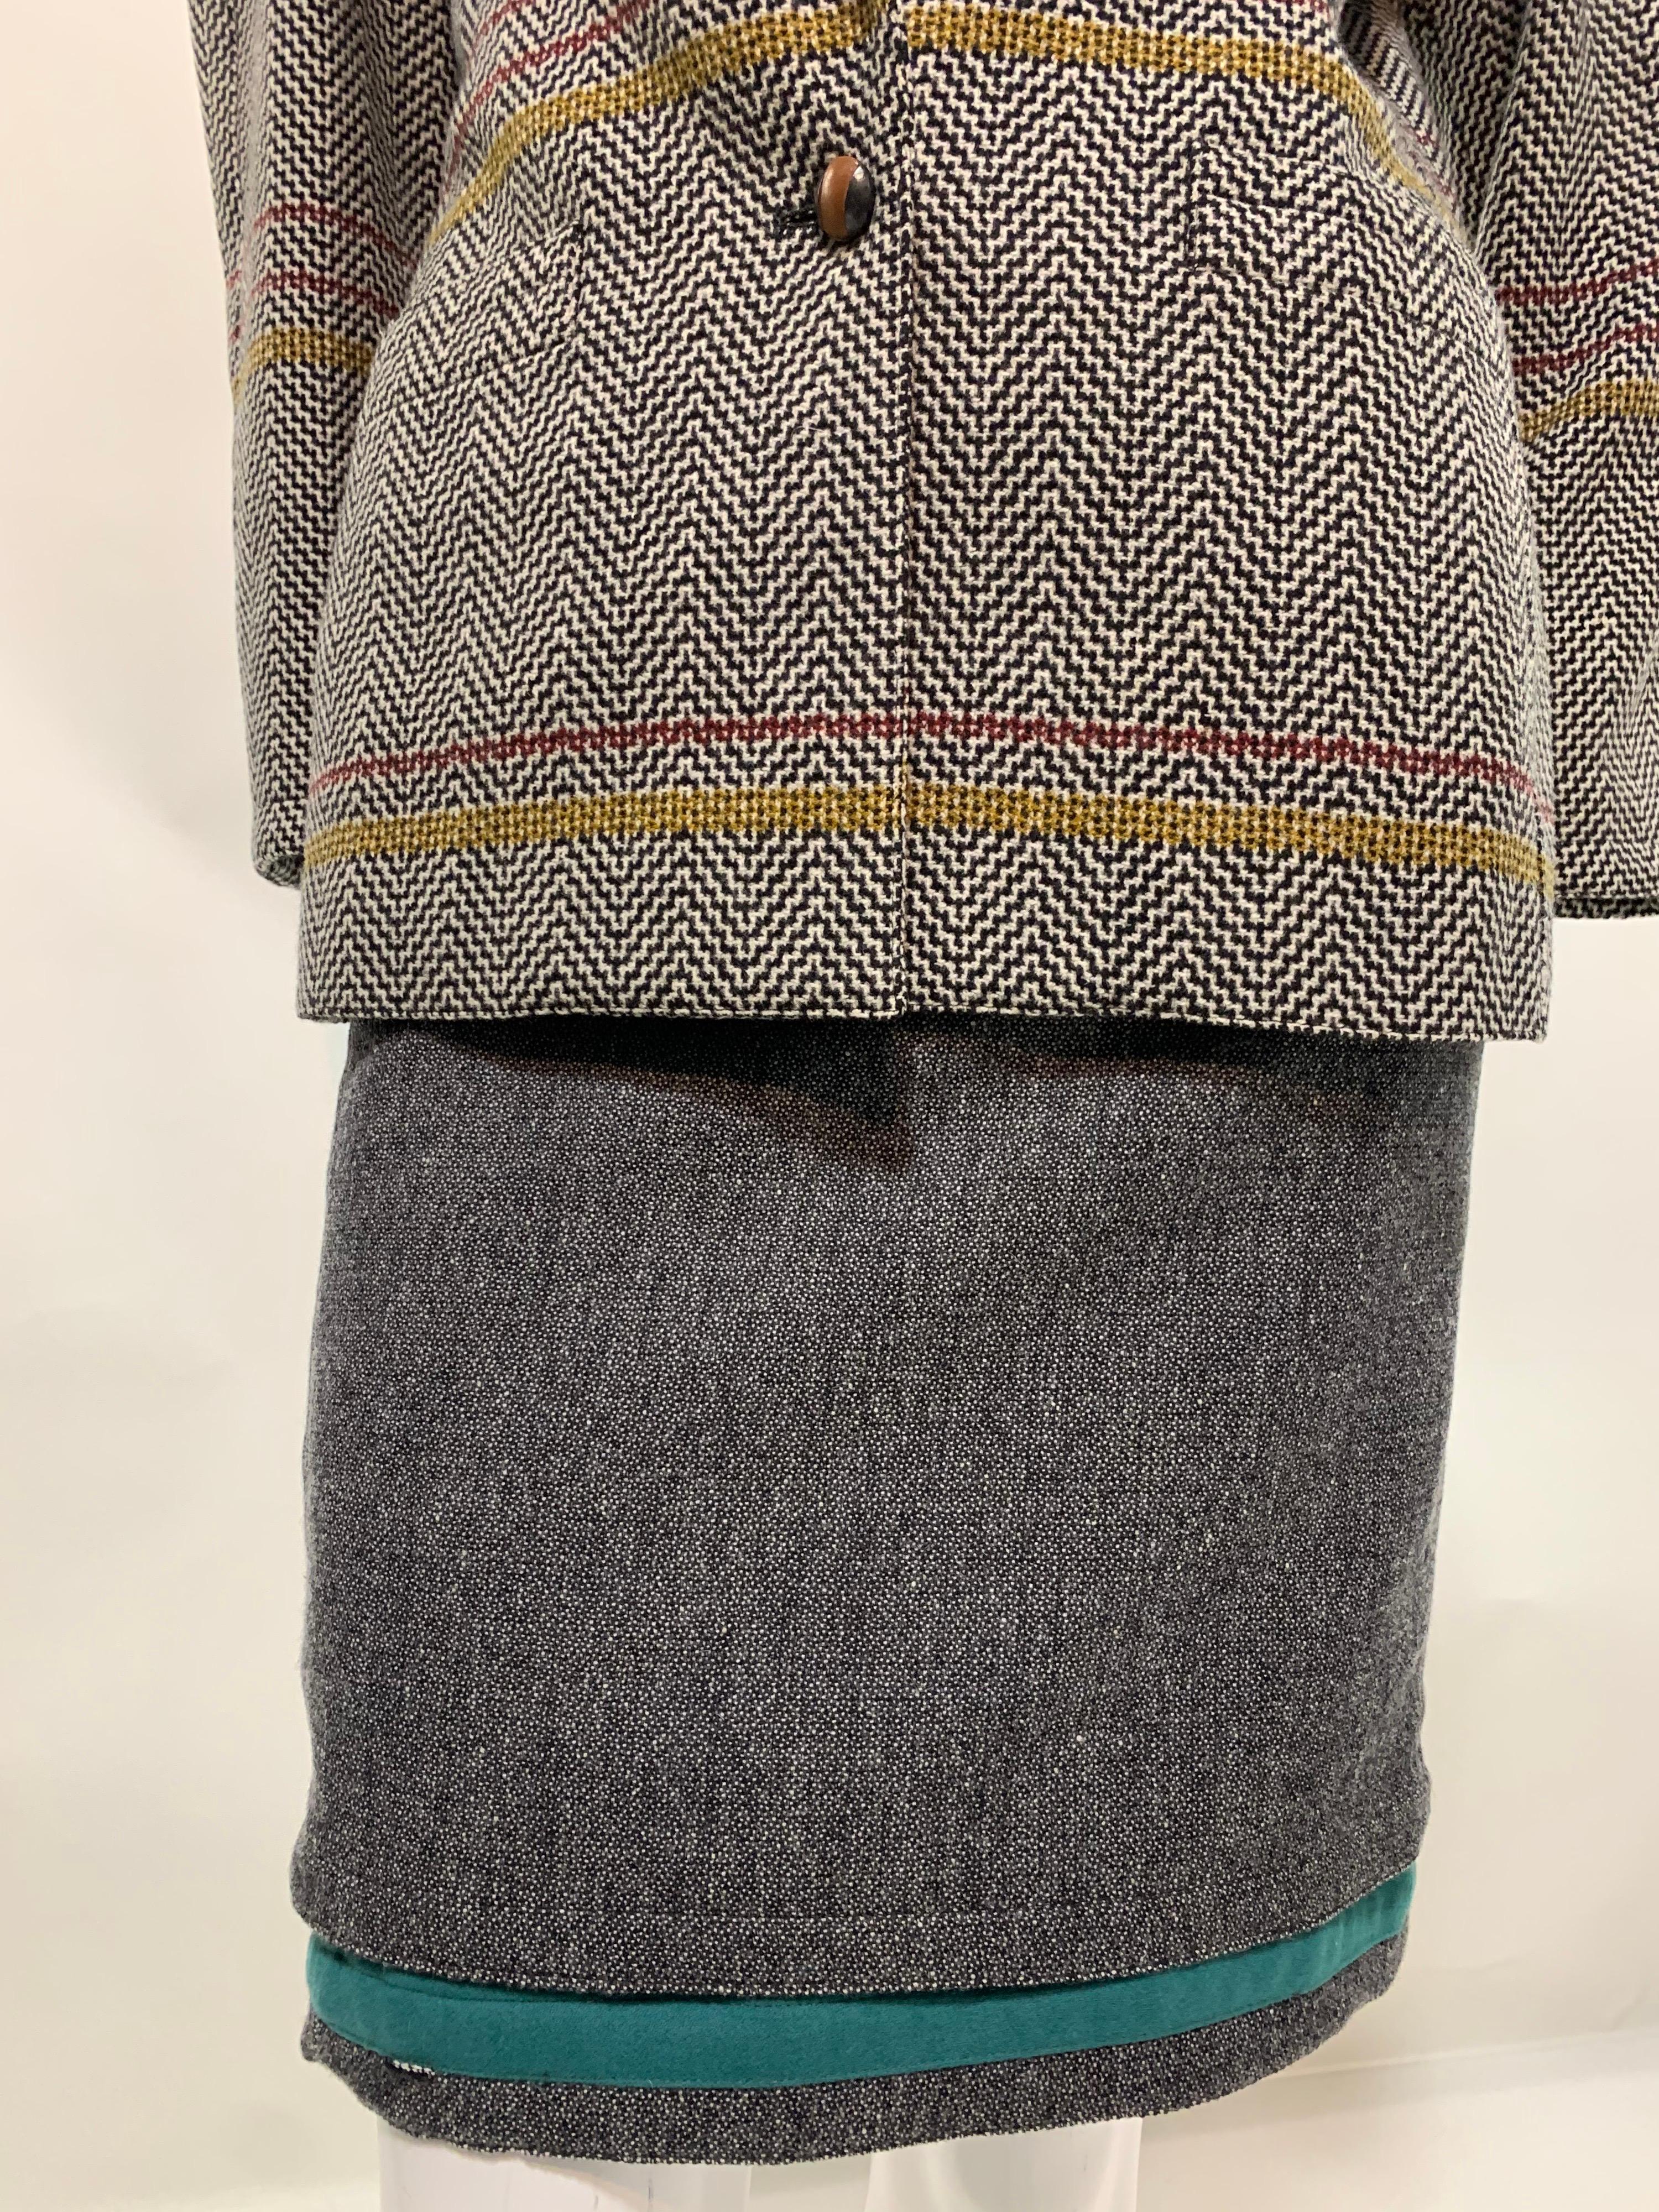 1980s Gianni Versace mixed wool tweed skirt suit with softly structured padded shoulder silhouette. Subtle touches of olive, burgundy and teal. Perfect for a walk in the countryside on a brisk fall day. Jacket is labeled EU 42 and skirt is EU 40.